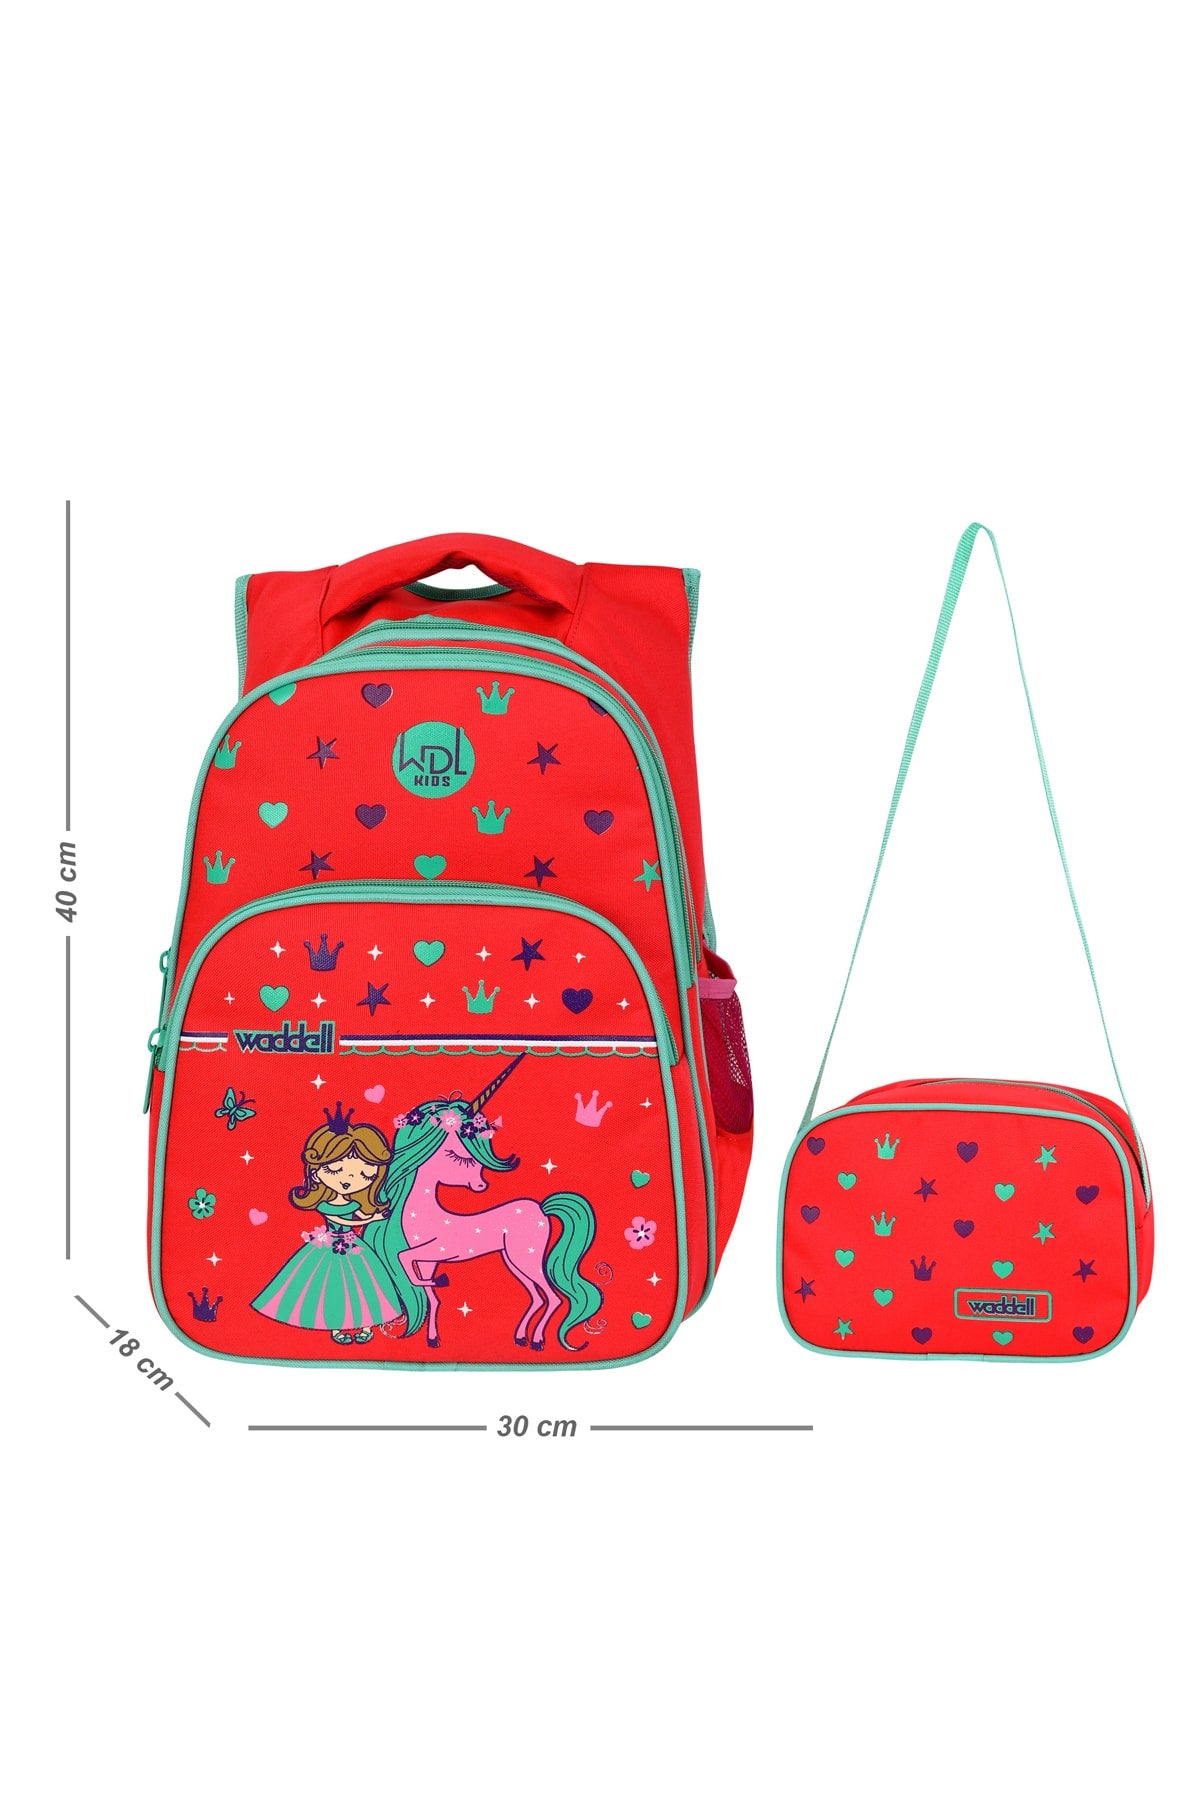 Licensed Coral Princess Patterned Primary School Backpack And Lunch Box